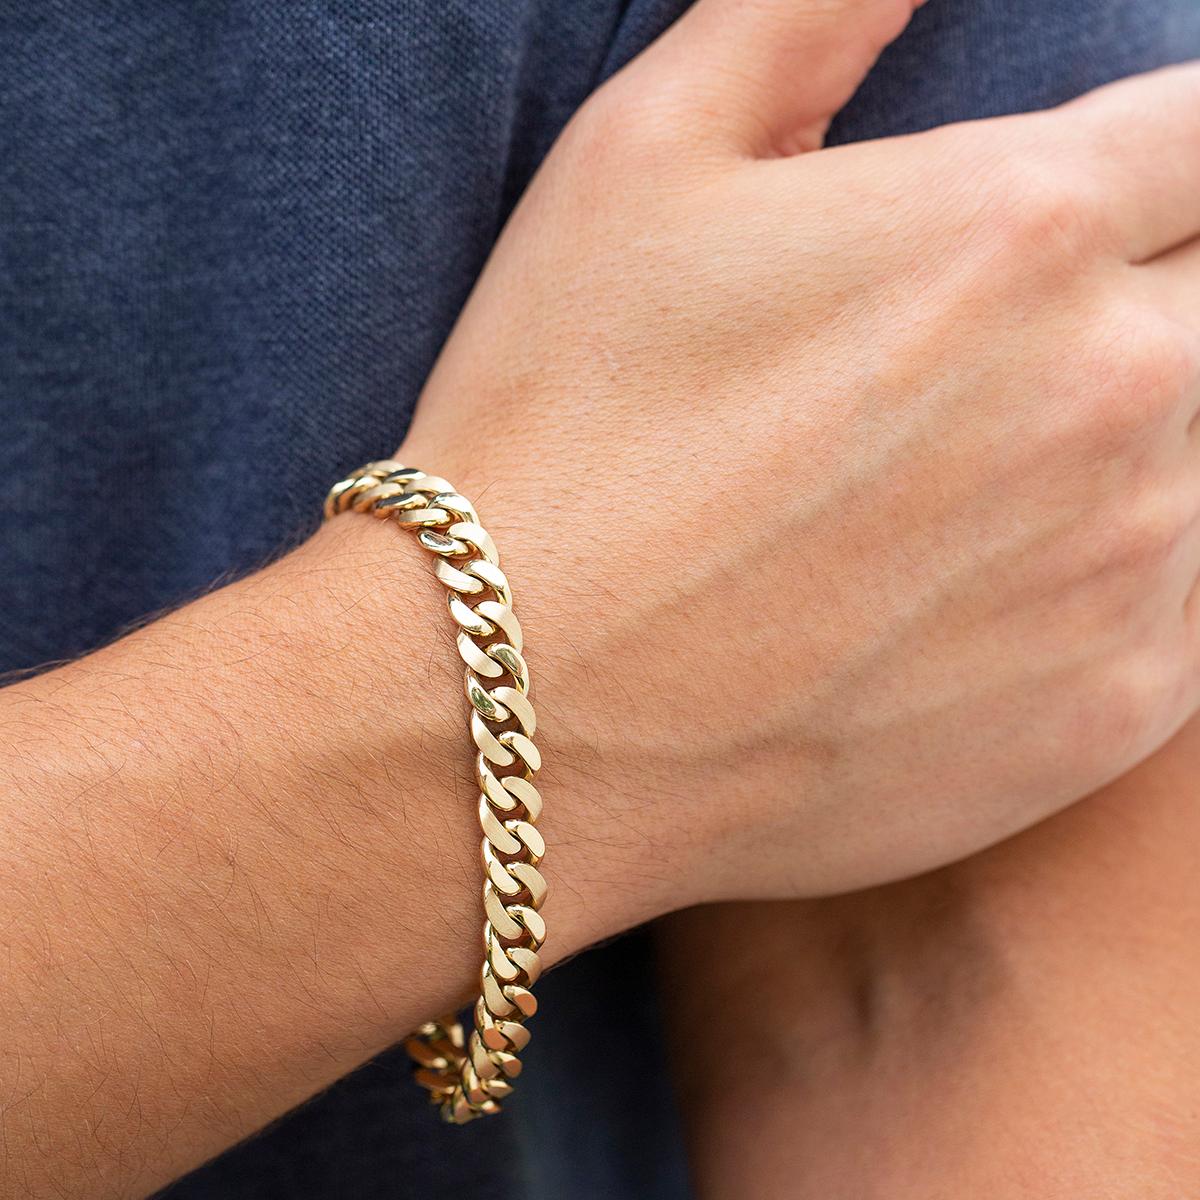 Thick Yellow Gold Curb Link Bracelet with Satin Finish 1